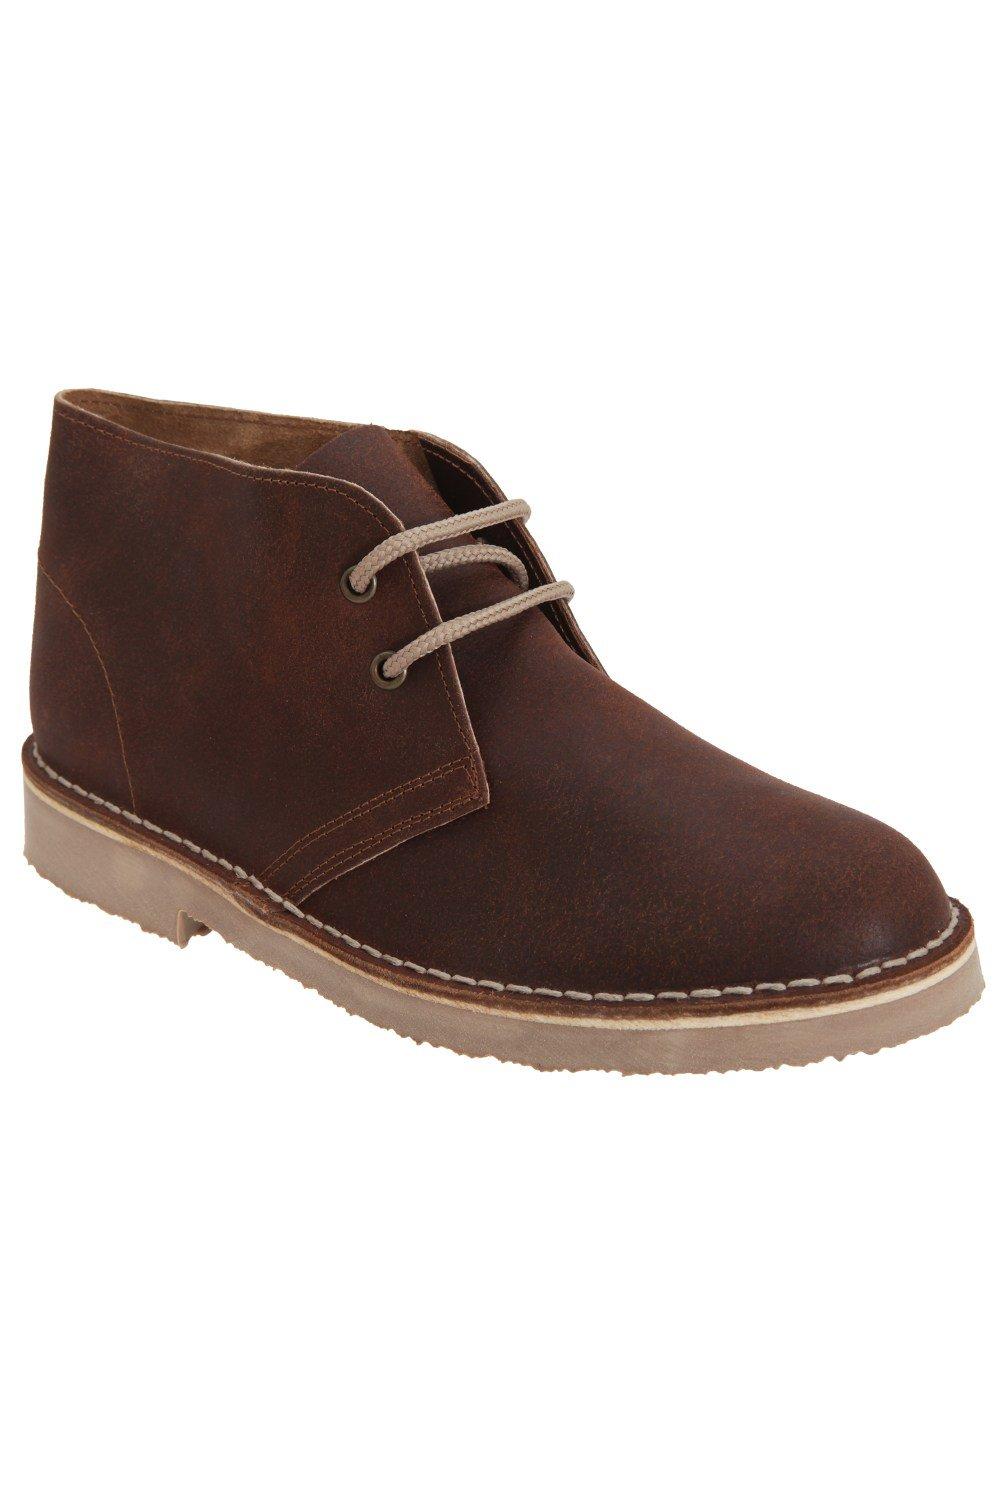 Unlined Distressed Leather Desert Boots